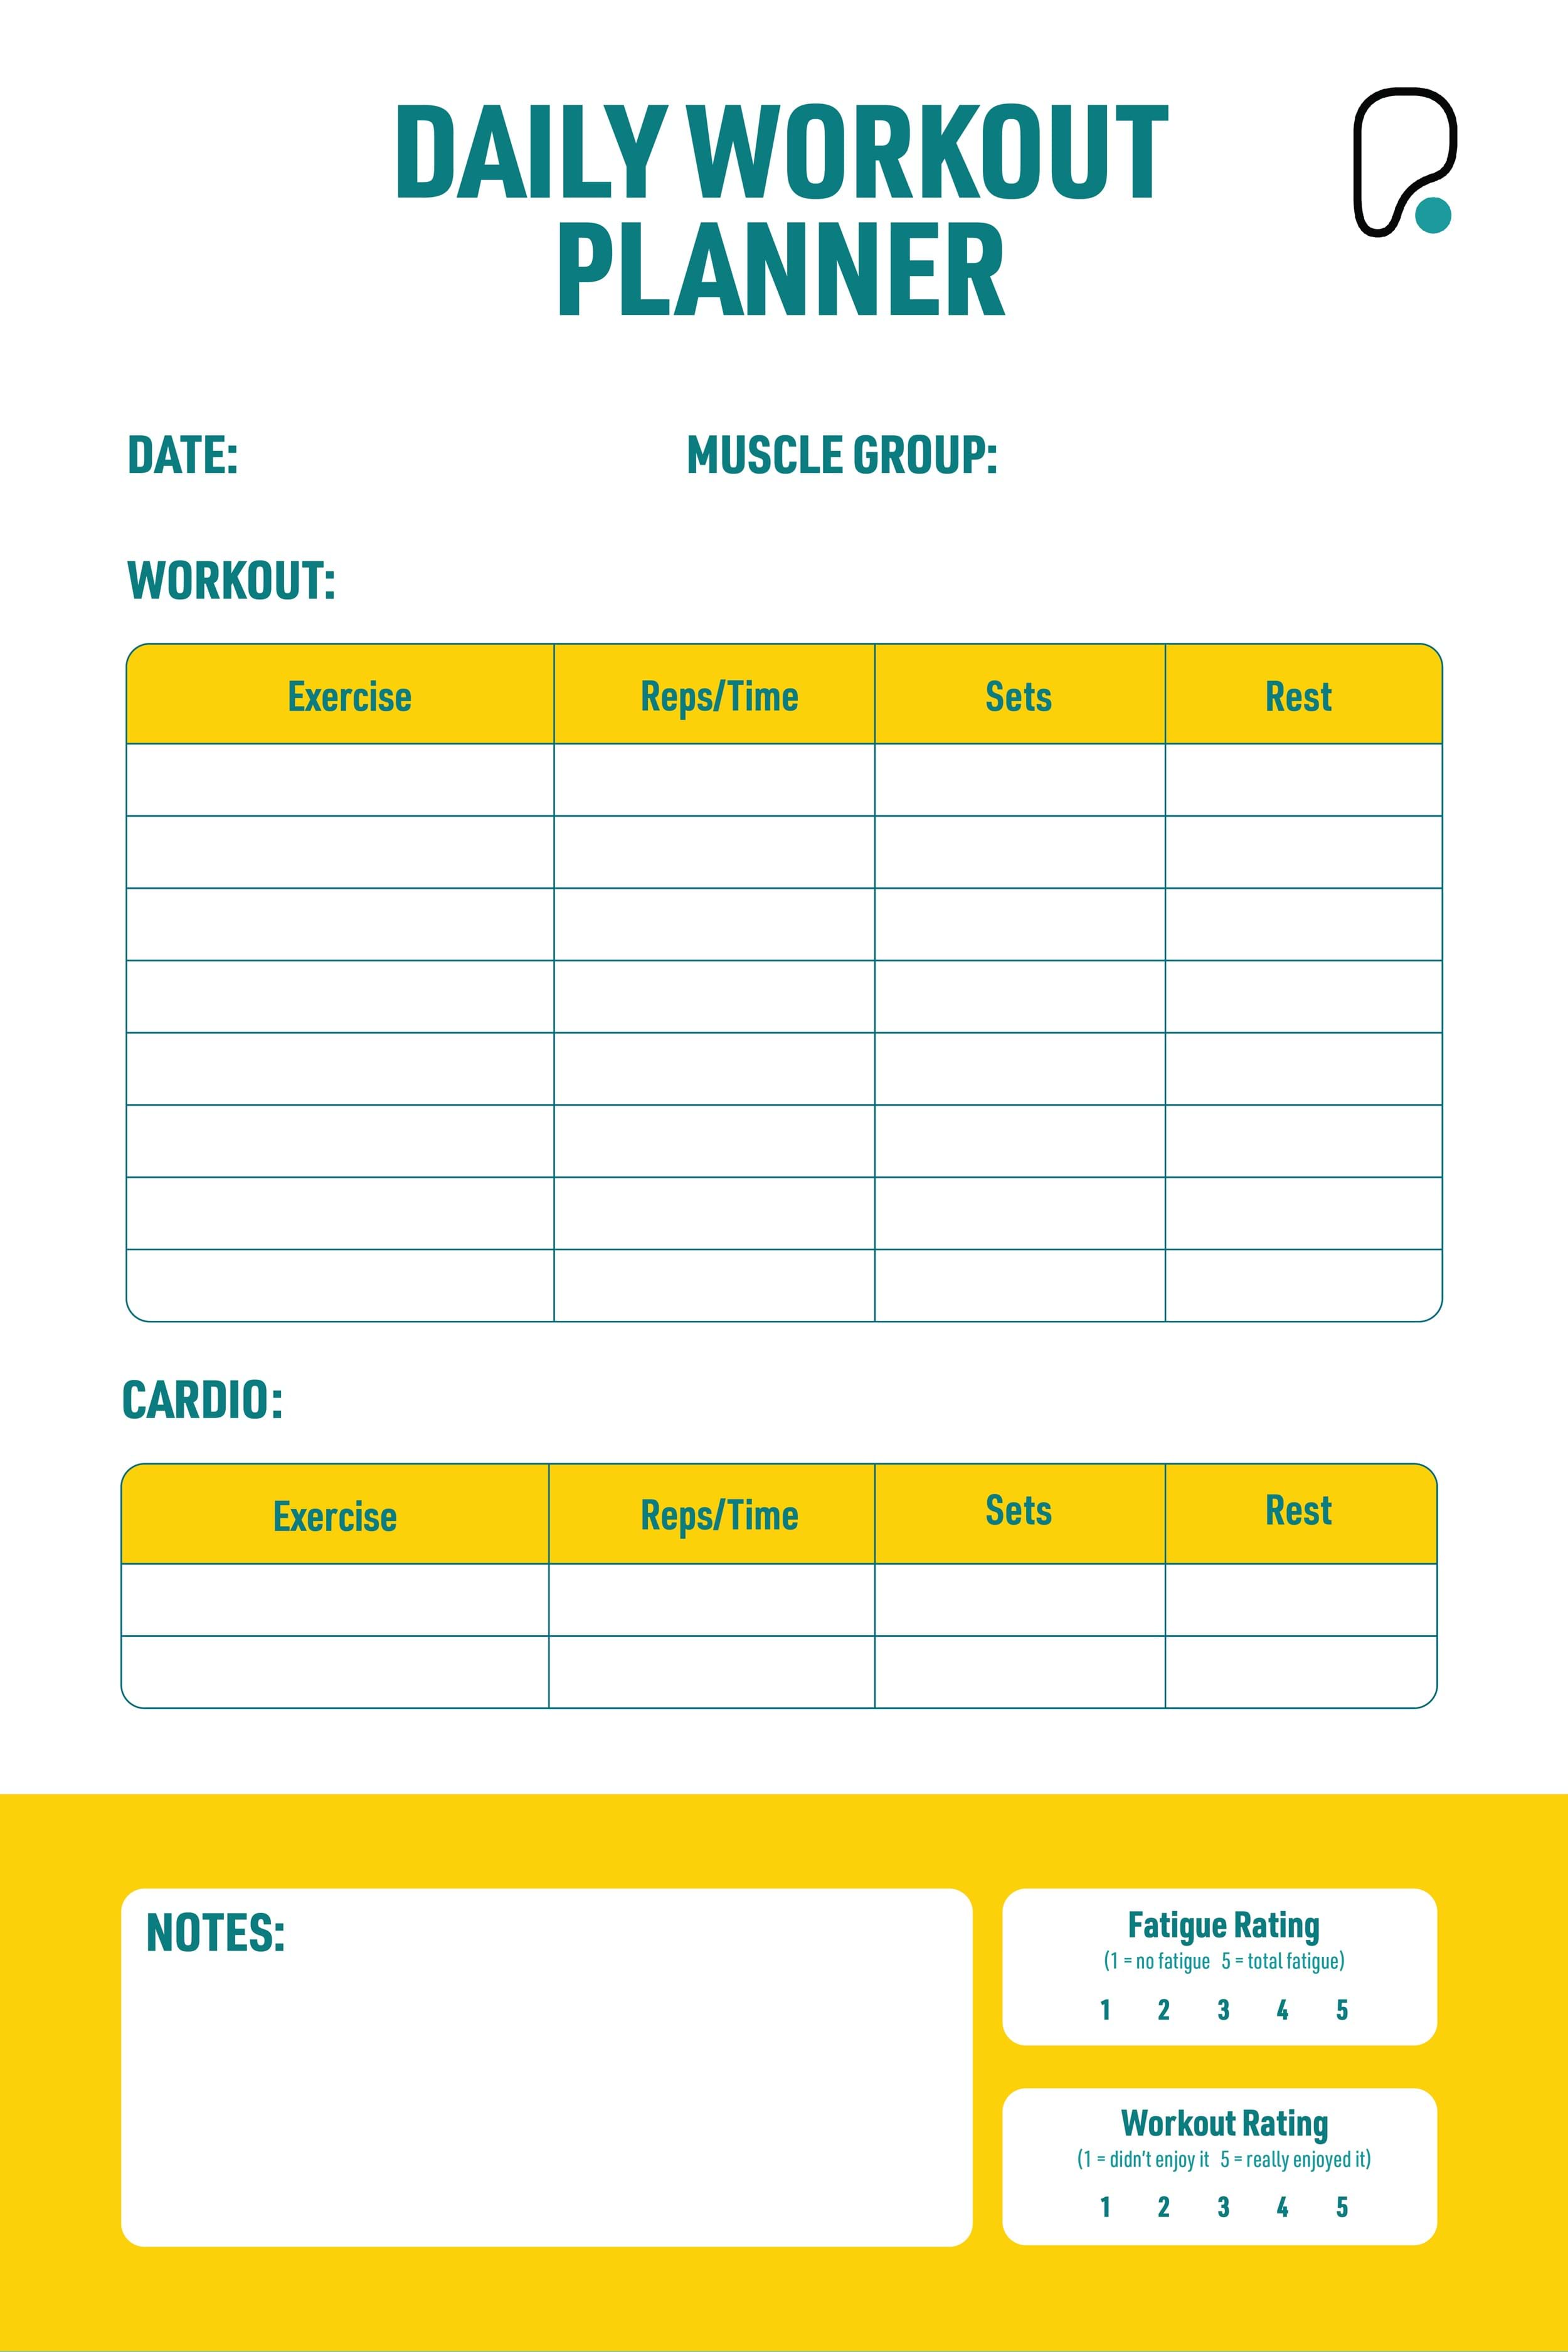 Workout Plan Templates: Download Or Make Yourself PureGym